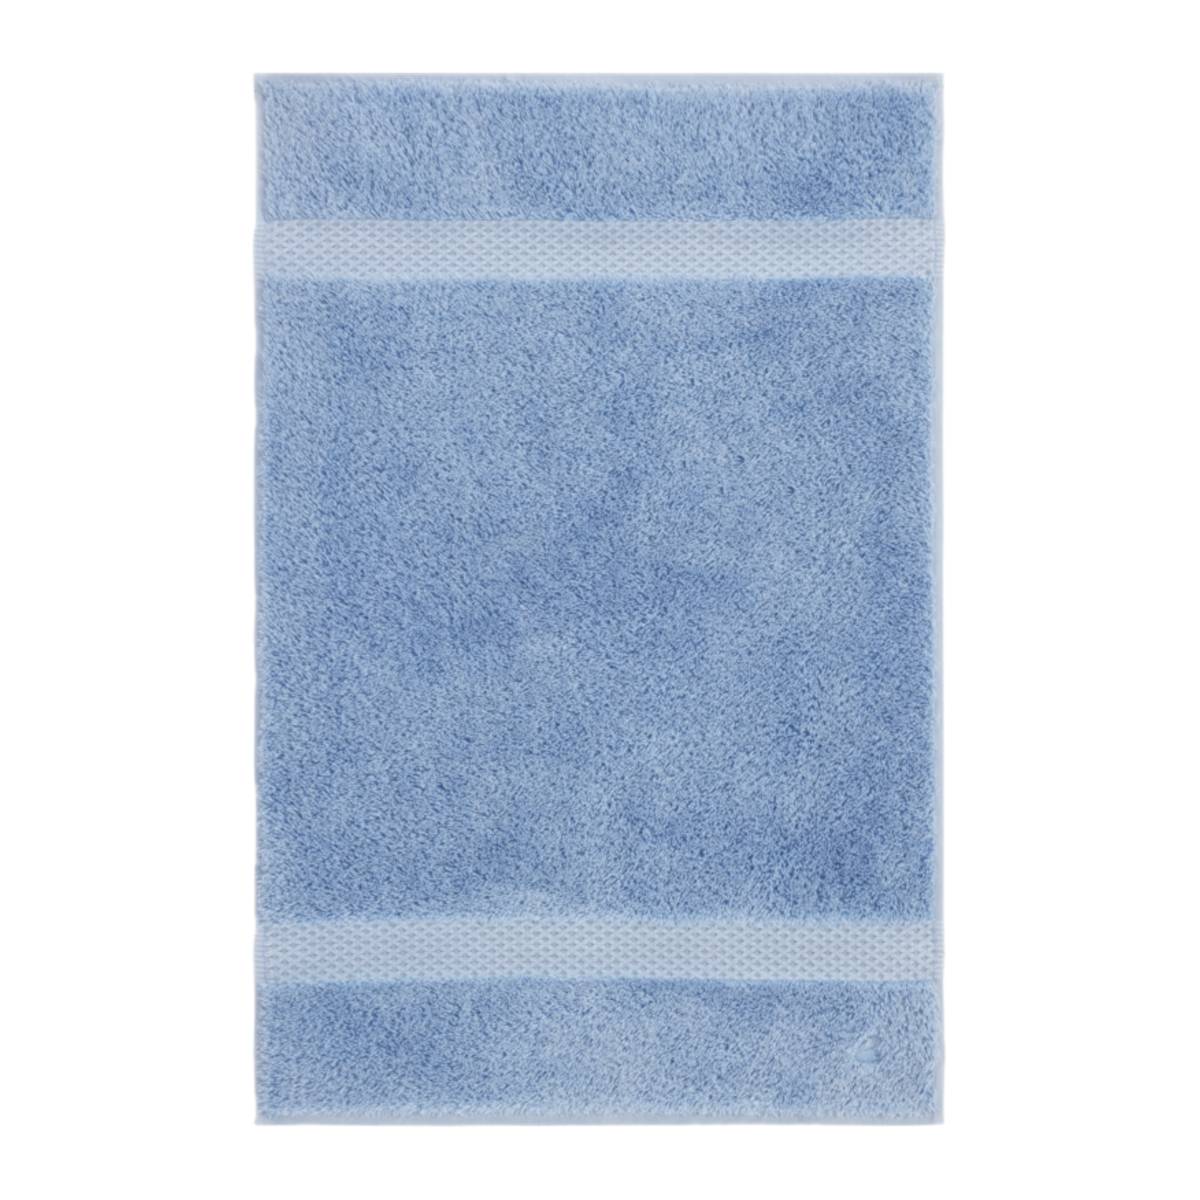 Bath Towel of Yves Delorme Etoile Bath Towels in Azure Color